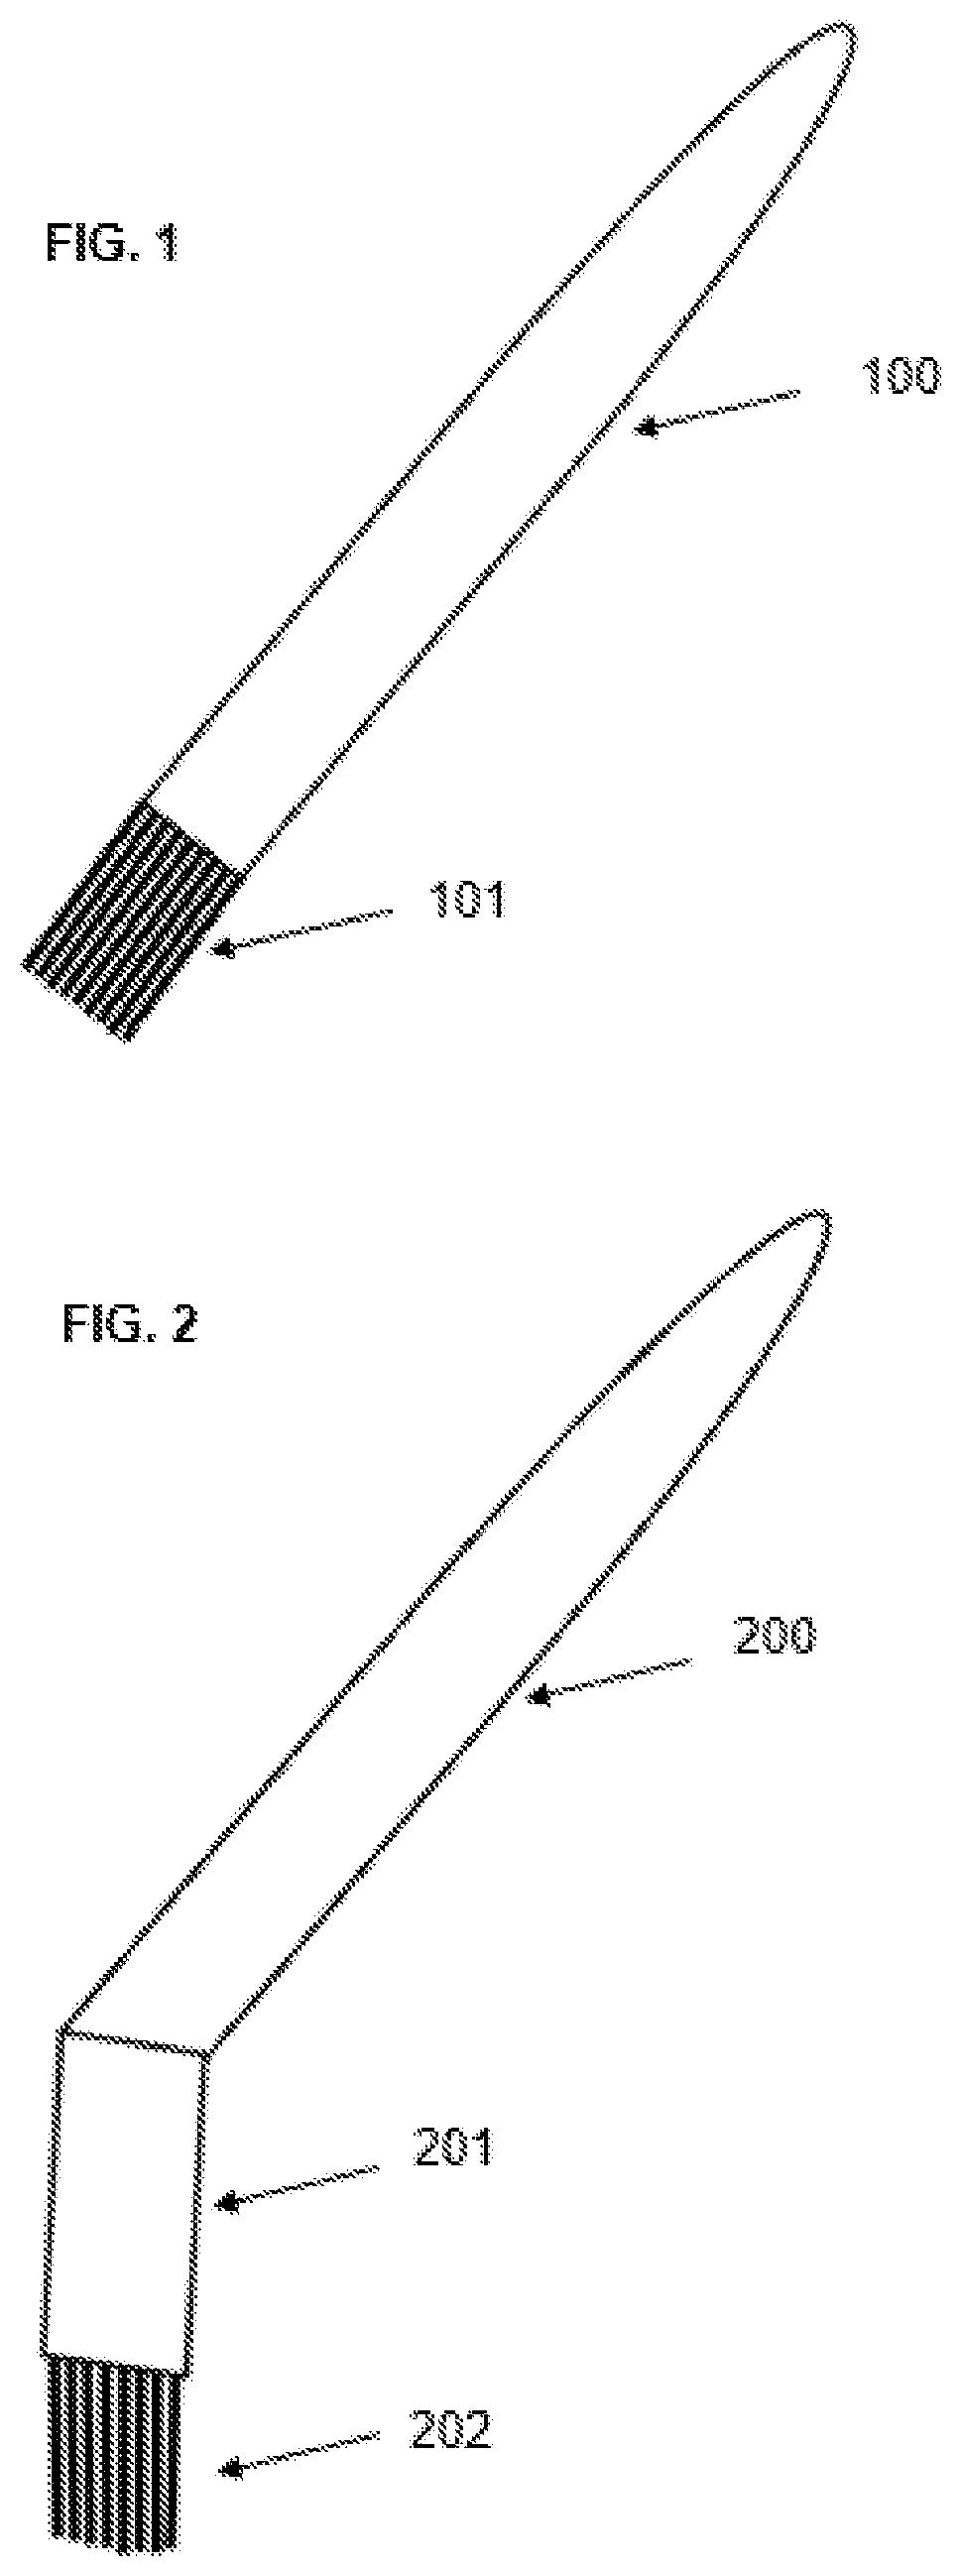 Targeted drug delivery devices and methods